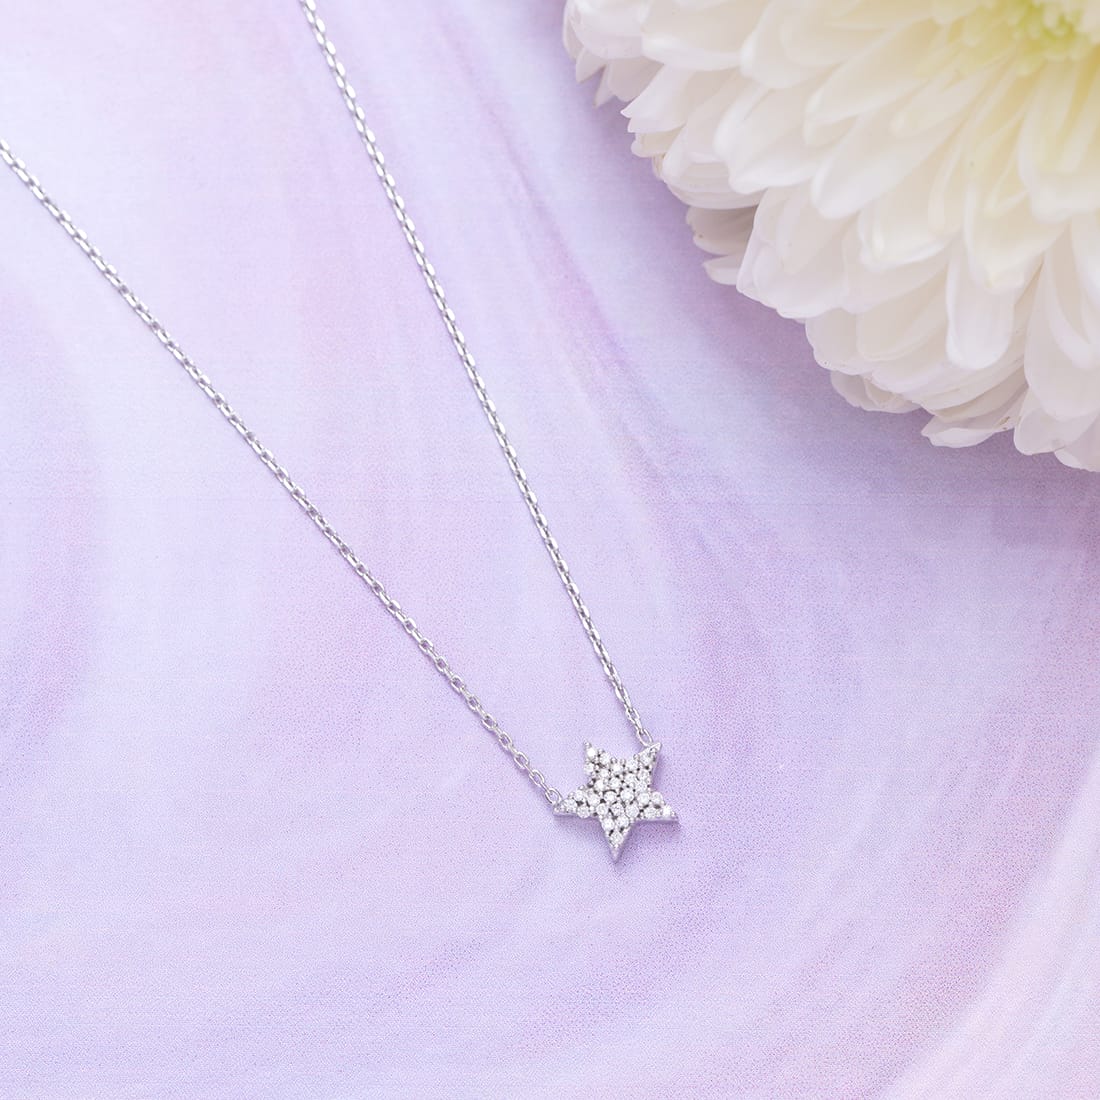 Bright Star 925 Sterling Silver Necklace